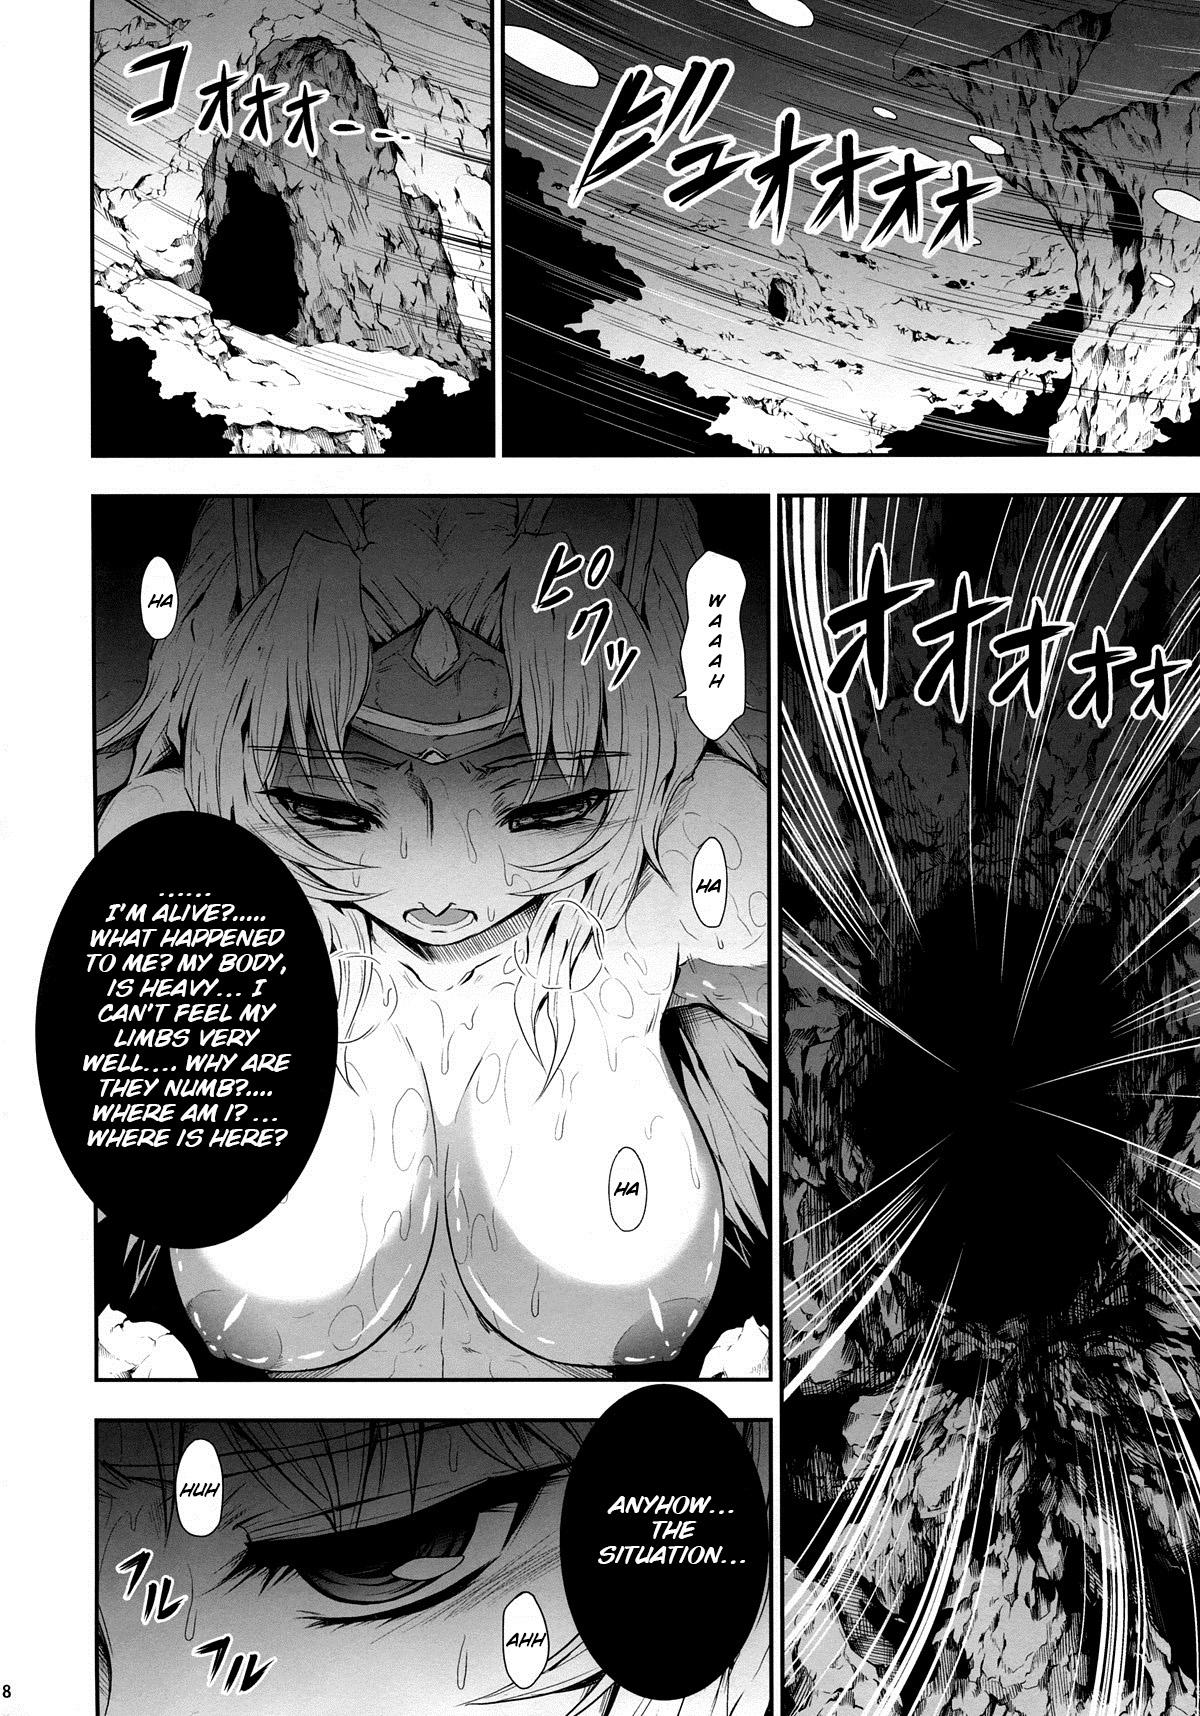 Pussyfucking Solo Hunter no Seitai 4 The third part - Monster hunter Blackcock - Page 8